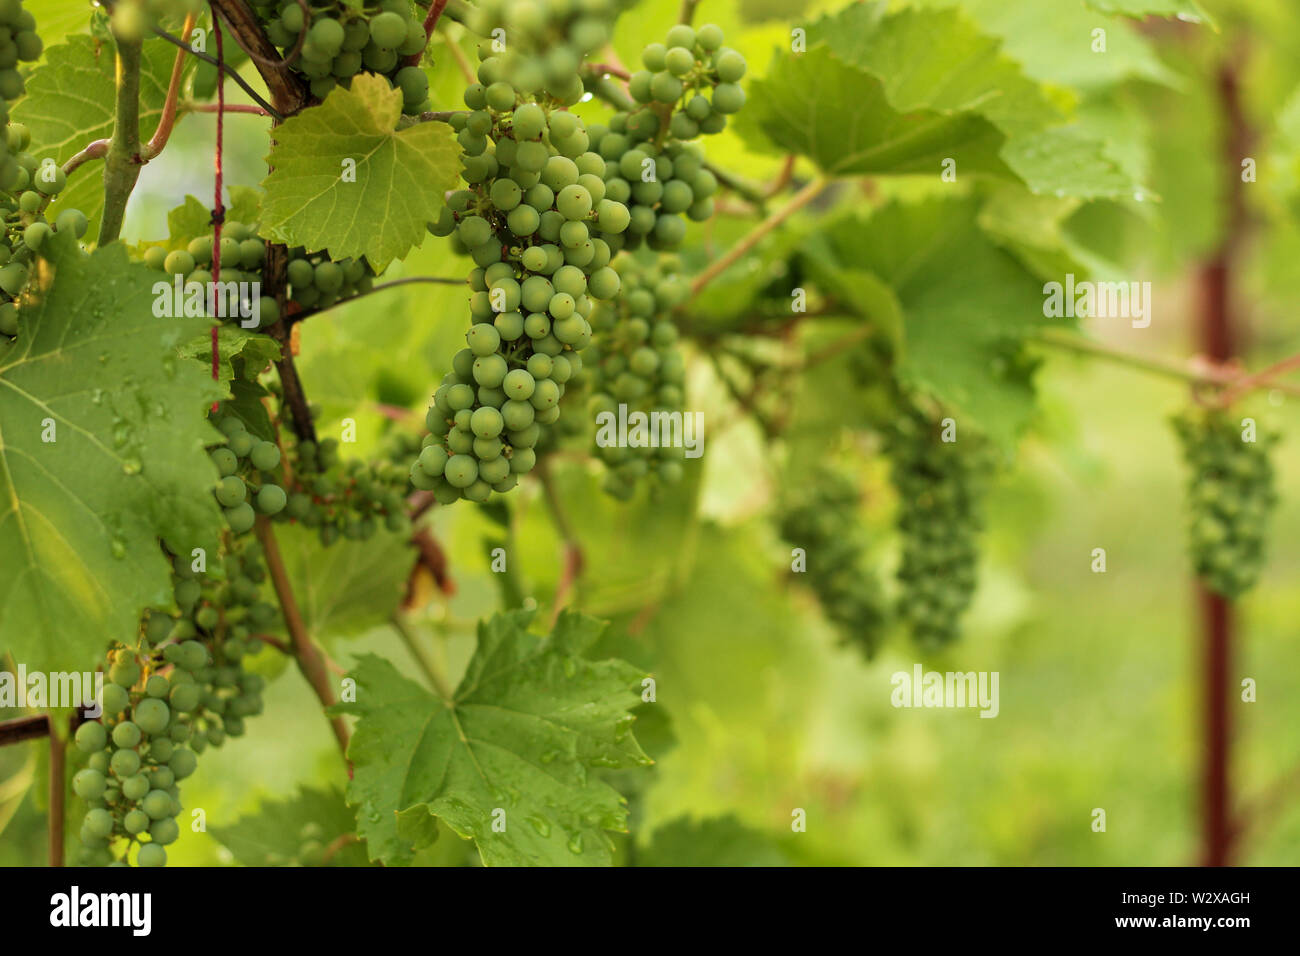 Growing grape in vineyard in the sunlight. Clusters of unripe grape close-up. Stock Photo